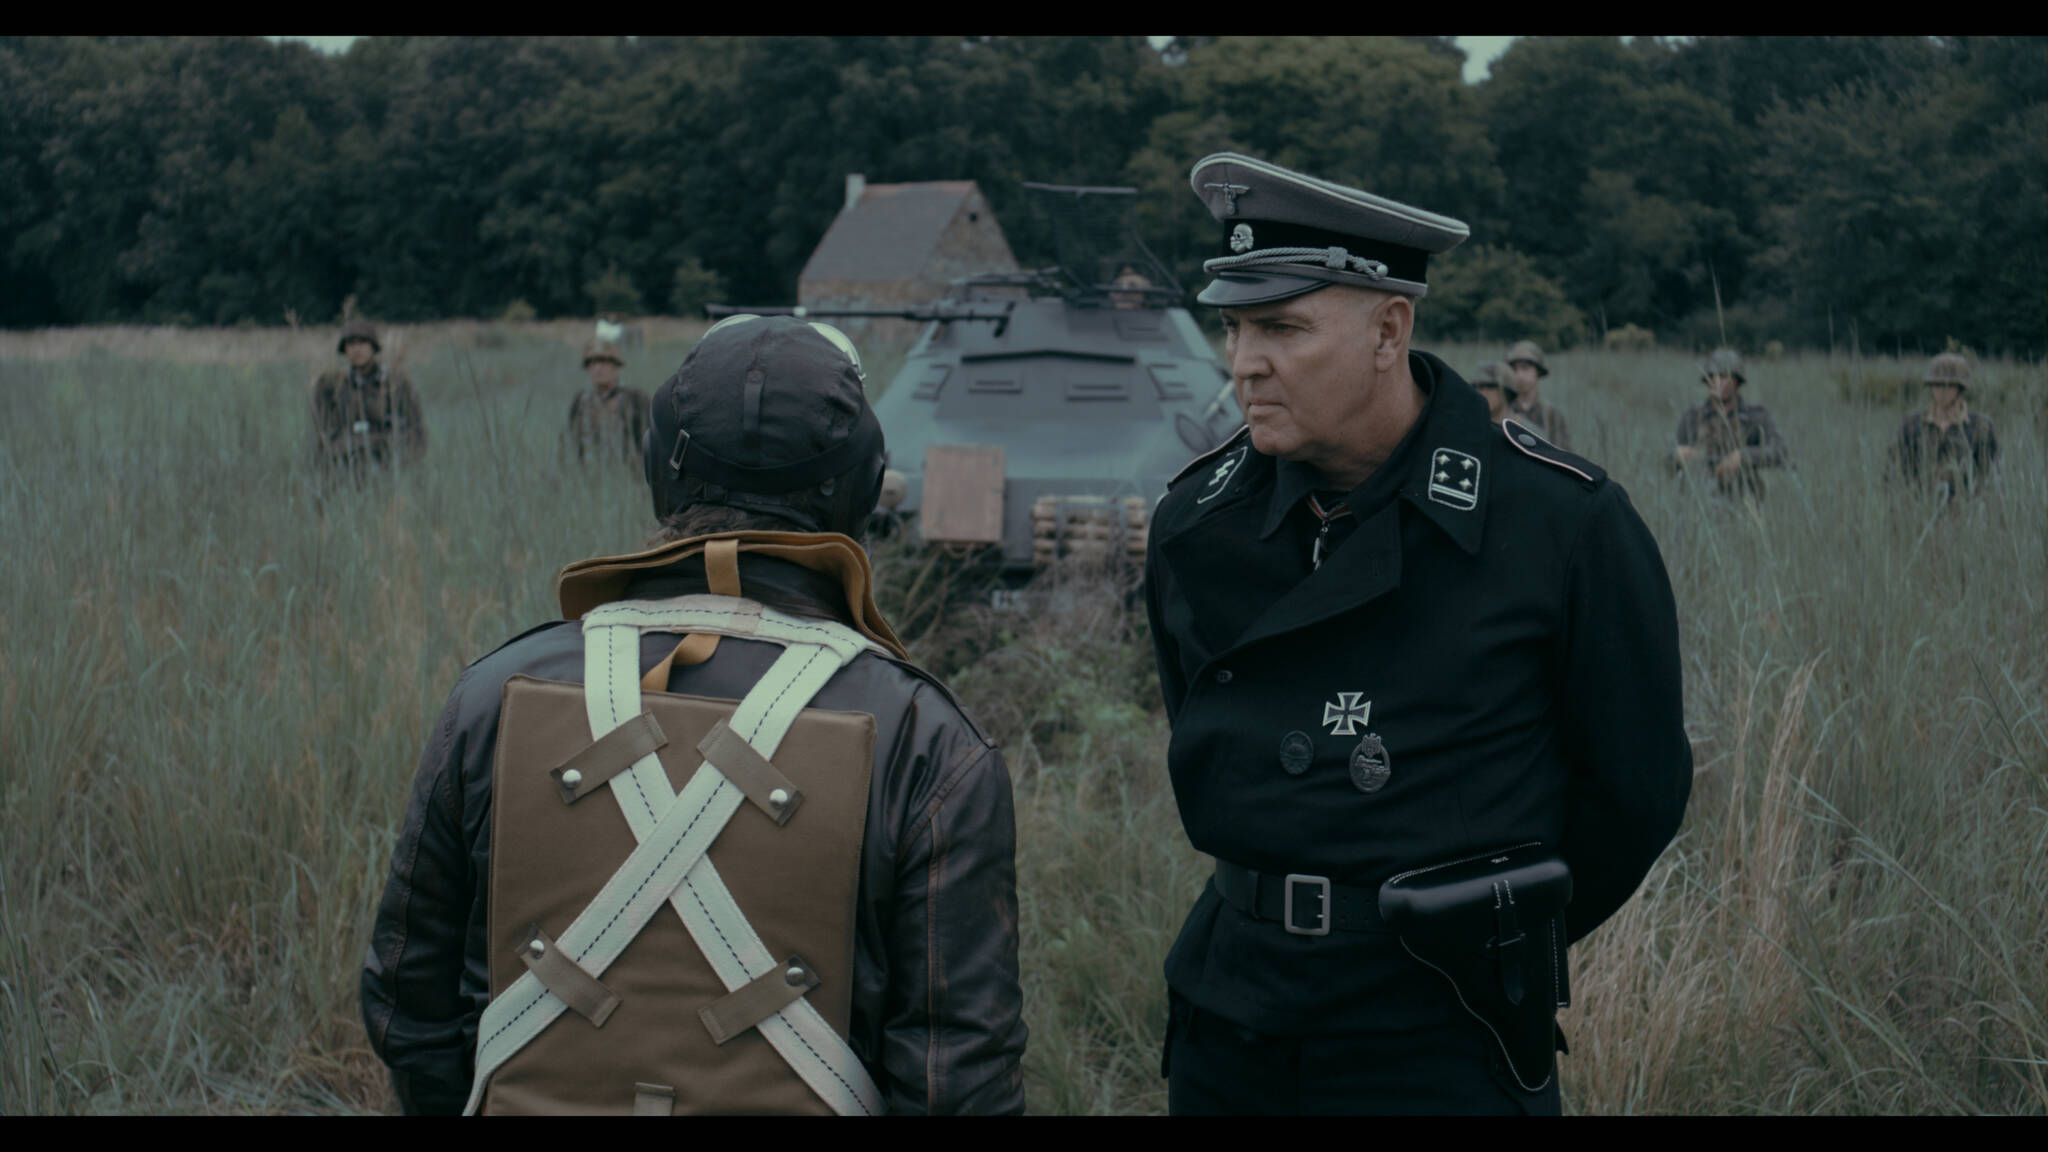 Arnold Vosloo as Colonel Bach addresses US soldiers in latest film, “Condor’s Nest” in theaters and digital release on Friday. (Courtesy Photo / PMKBNC)